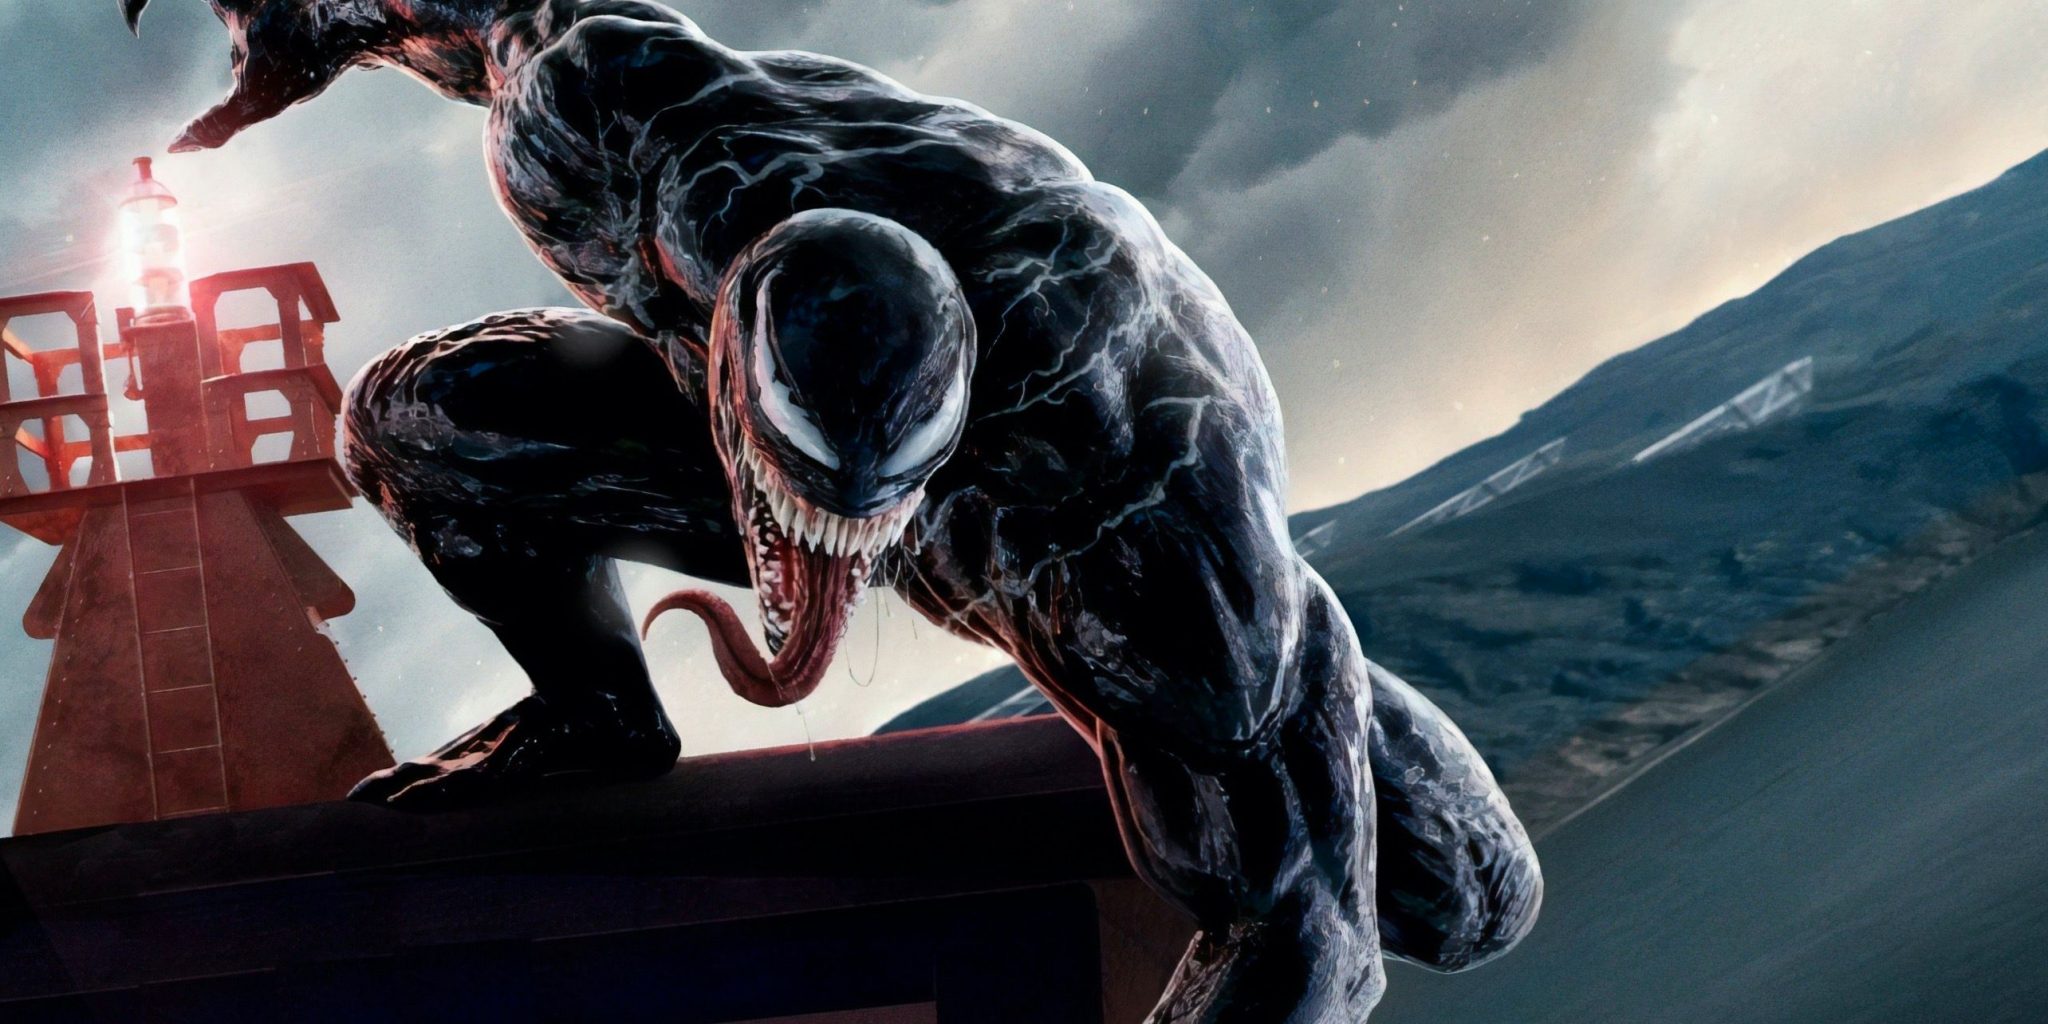 Venom: Let There Be Carnage' Officially Rated PG-13.